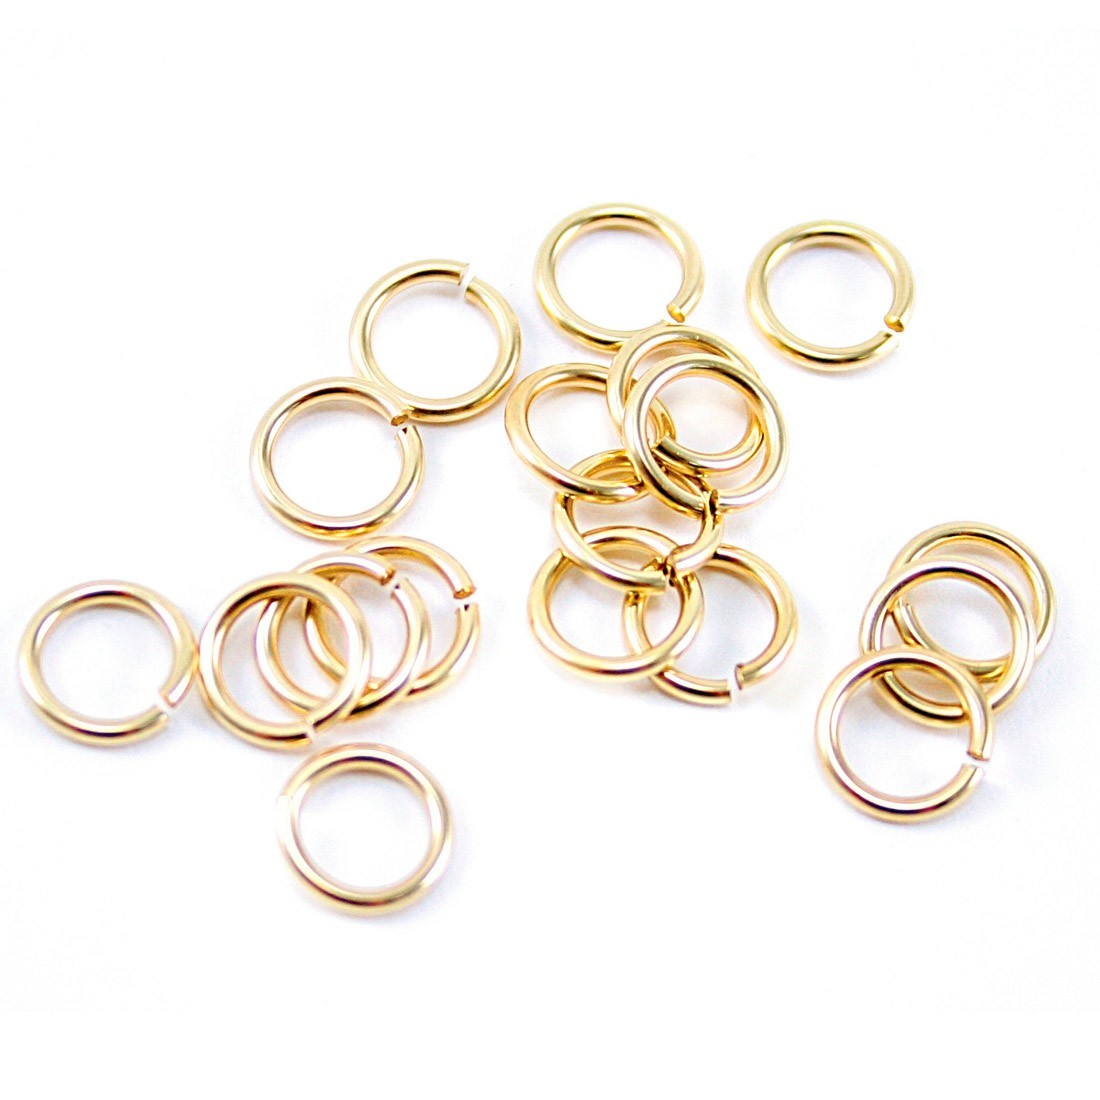 JR-1003, Sterling Silver & Gold Filled Jump Ring Assortments